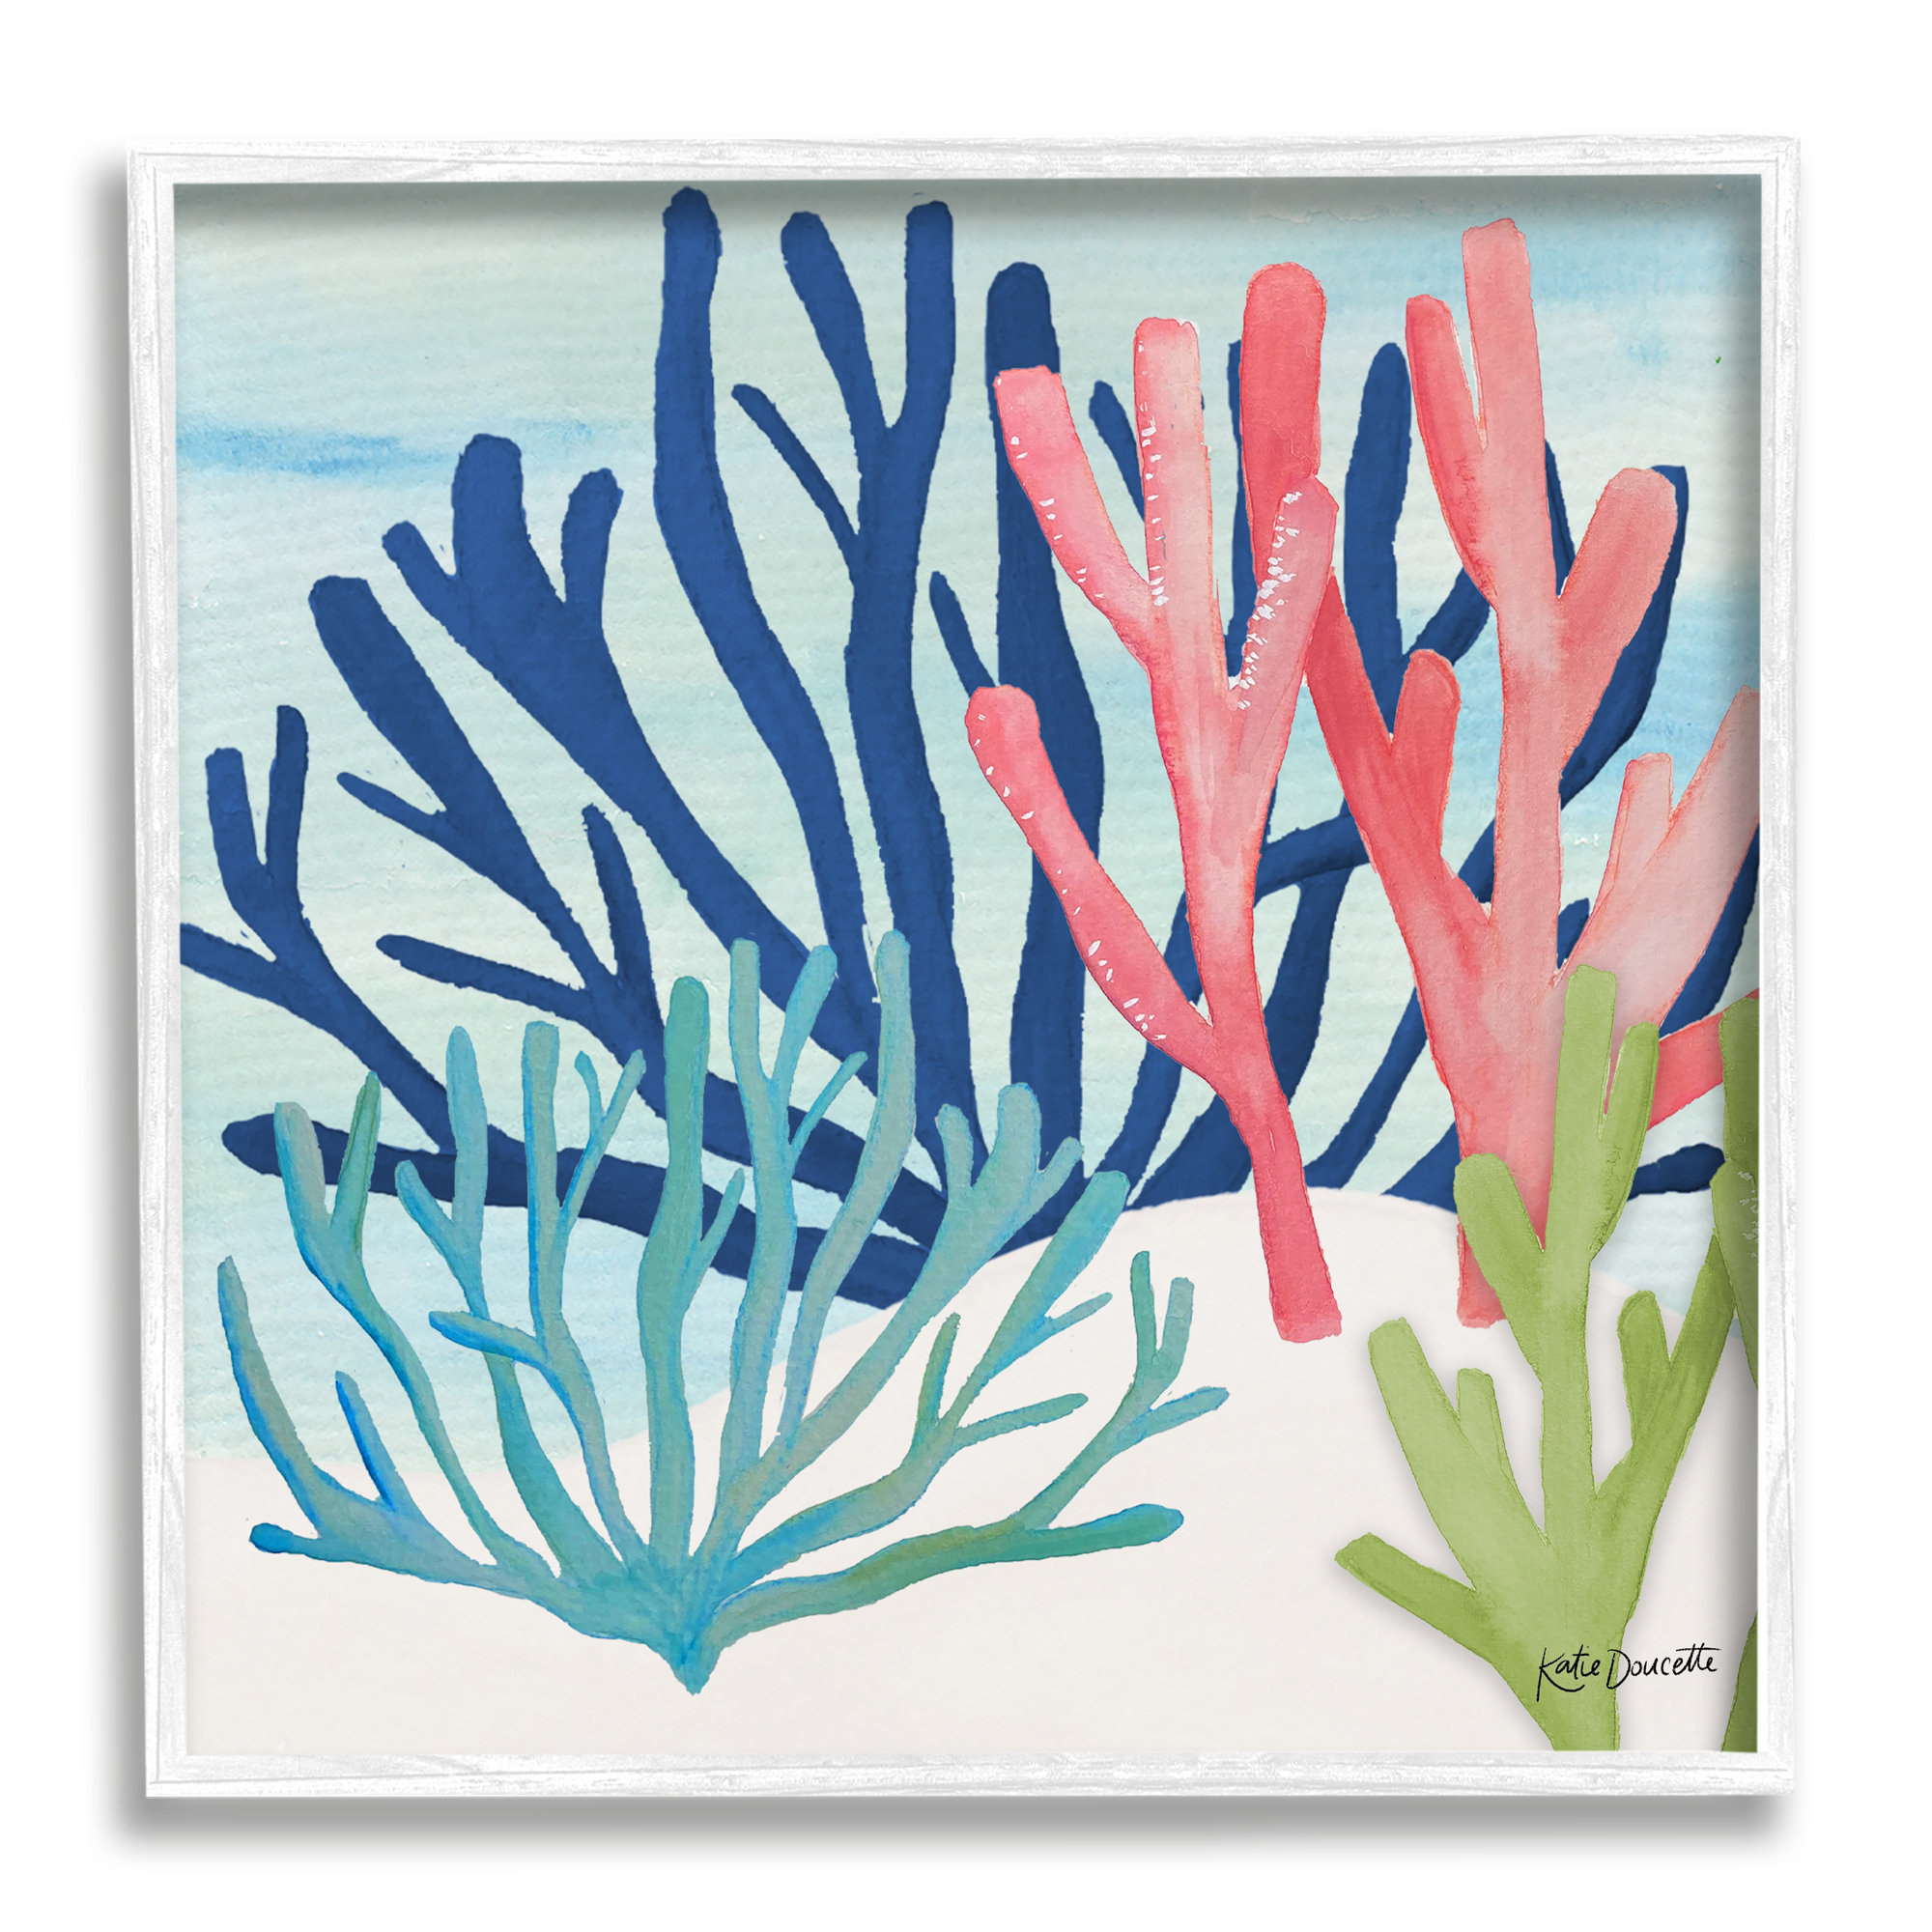 Stupell Industries  Underwater Sea Life Blue Pink Ocean Coral Reef  by  Katie Doucette Painting on